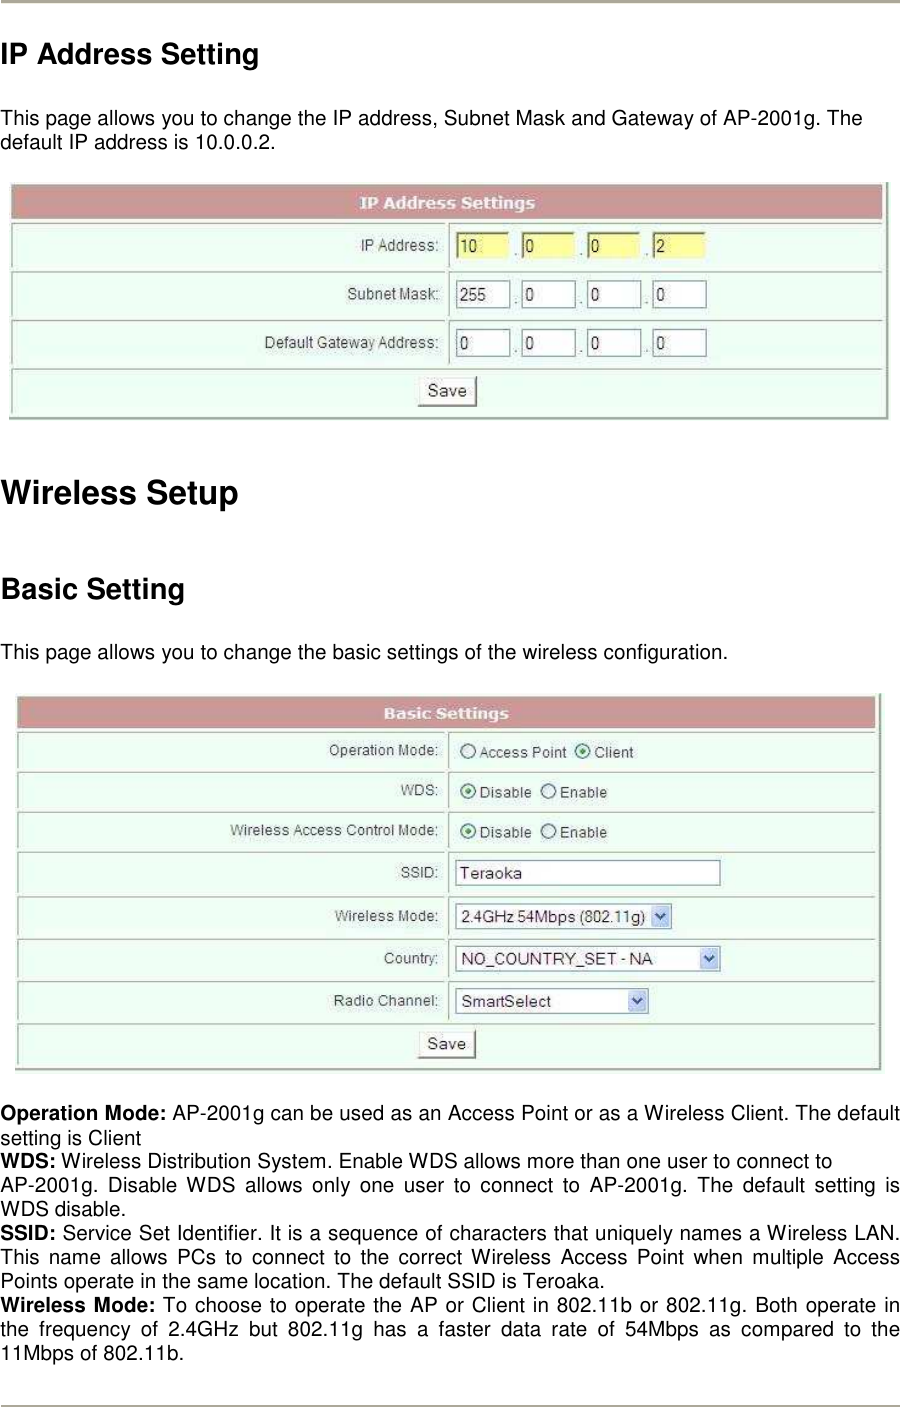        IP Address Setting  This page allows you to change the IP address, Subnet Mask and Gateway of AP-2001g. The default IP address is 10.0.0.2.    Wireless Setup  Basic Setting  This page allows you to change the basic settings of the wireless configuration.    Operation Mode: AP-2001g can be used as an Access Point or as a Wireless Client. The default setting is Client WDS: Wireless Distribution System. Enable WDS allows more than one user to connect to  AP-2001g.  Disable WDS  allows  only  one  user  to  connect  to  AP-2001g.  The  default  setting  is WDS disable. SSID: Service Set Identifier. It is a sequence of characters that uniquely names a Wireless LAN. This  name  allows  PCs  to  connect  to  the  correct  Wireless  Access  Point  when  multiple  Access Points operate in the same location. The default SSID is Teroaka.   Wireless Mode: To choose to operate the AP or Client in 802.11b or 802.11g. Both operate in the  frequency  of  2.4GHz  but  802.11g  has  a  faster  data  rate  of  54Mbps  as  compared  to  the 11Mbps of 802.11b. 